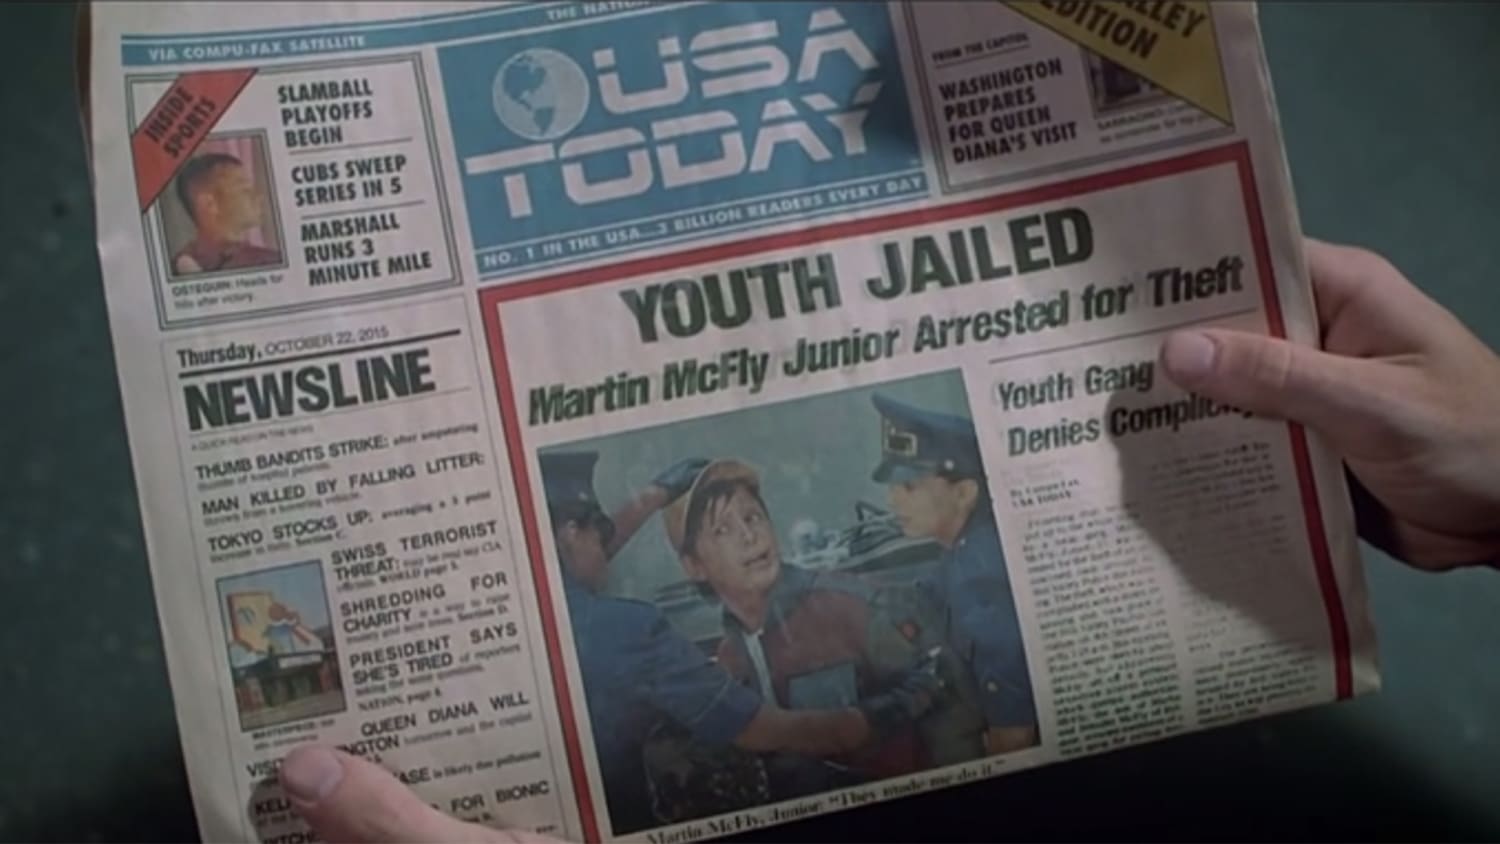 Back To The Future Part Ii Newspaper S Oct 22 Headlines Feel Strangely Spot On